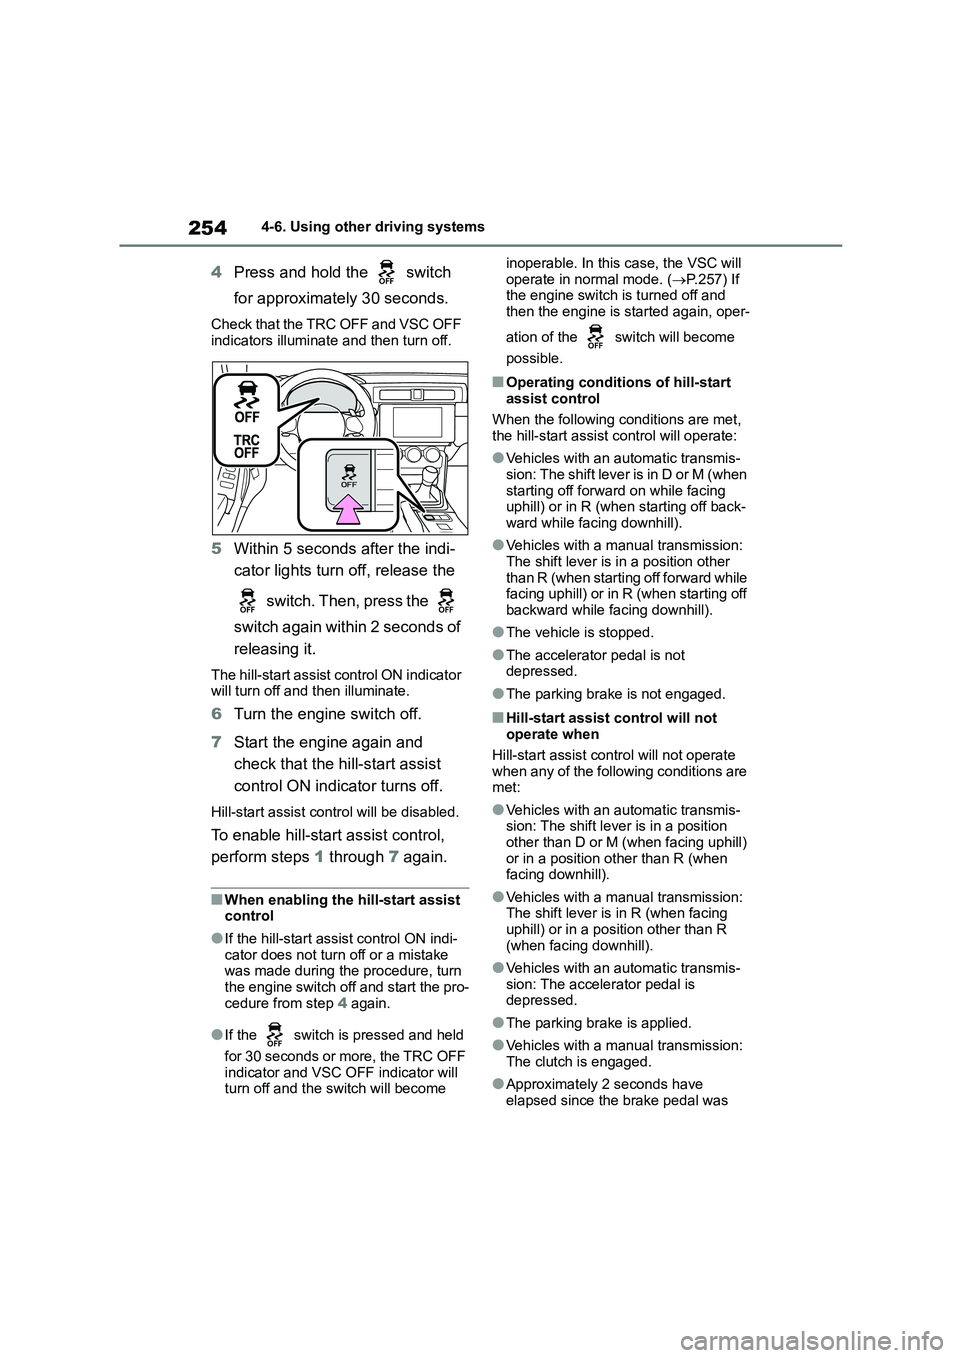 TOYOTA GR86 2022  Owners Manual (in English) 2544-6. Using other driving systems
4Press and hold the   switch  
for approximately 30 seconds.
Check that the TRC OFF and VSC OFF  
indicators illuminate and then turn off.
5 Within 5 seconds after 